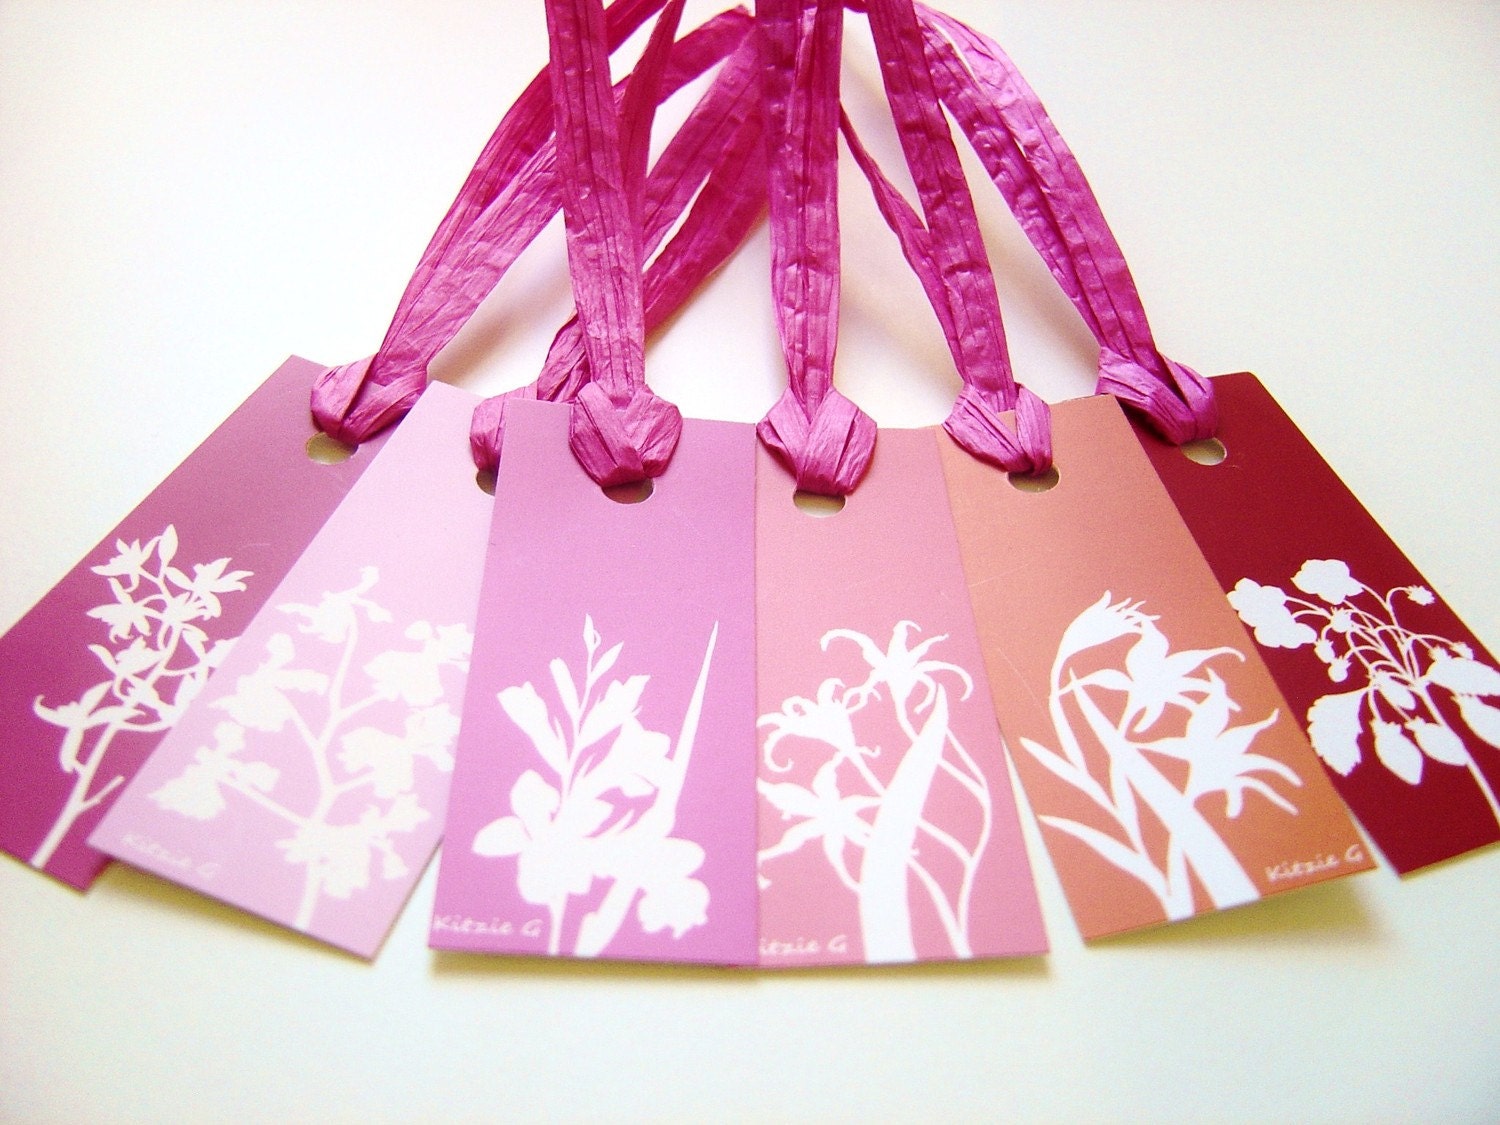 Gift Tags - Set of 12 in Pink, Red and Orange Botanical Floral Papercut Designs